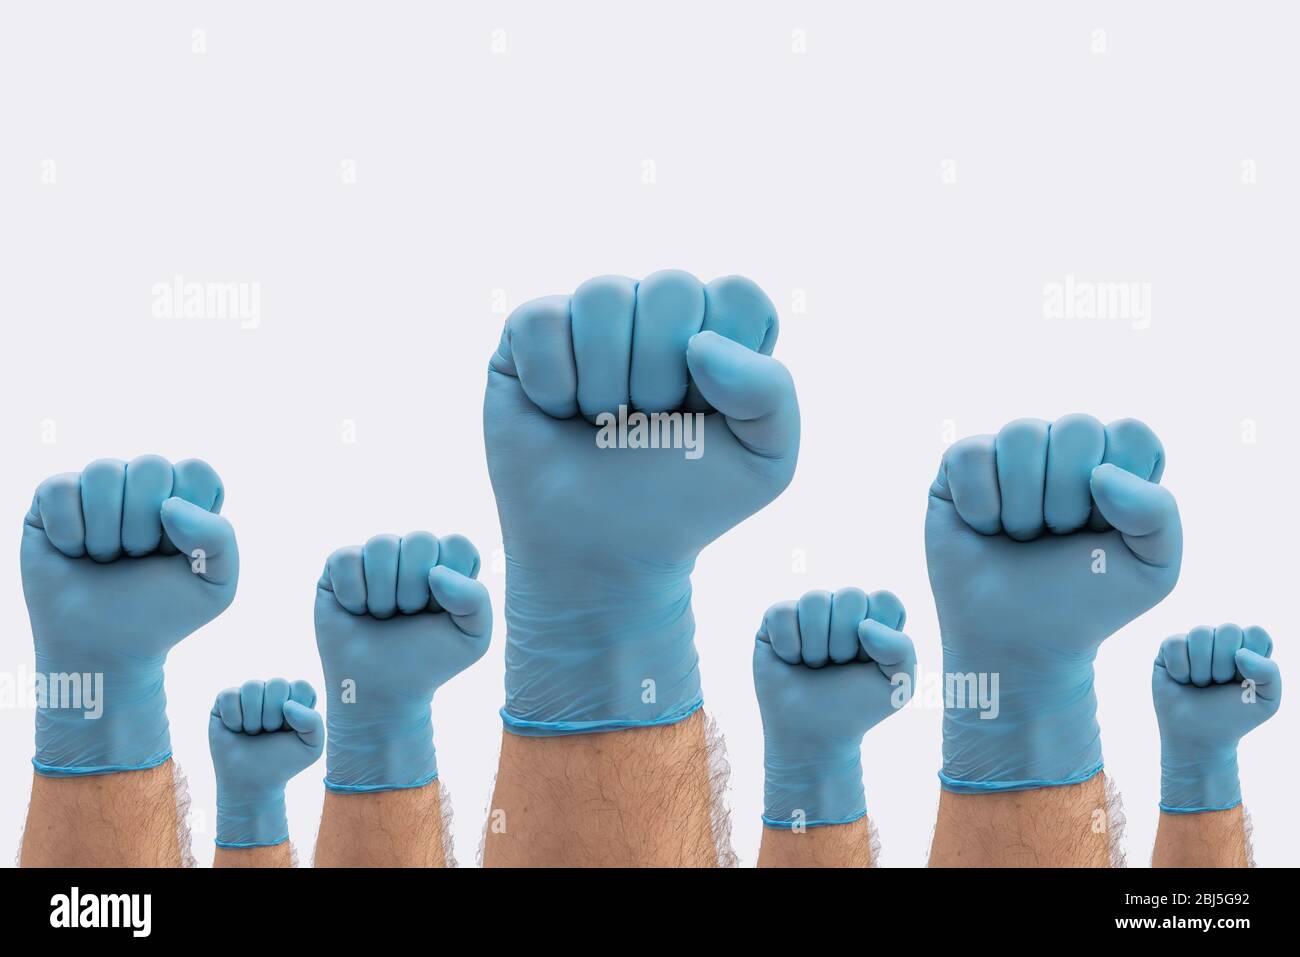 Fists Hands in medical blue latex protective gloves as a sign of resistance to pandemic - on white background stop disease sign Stock Photo